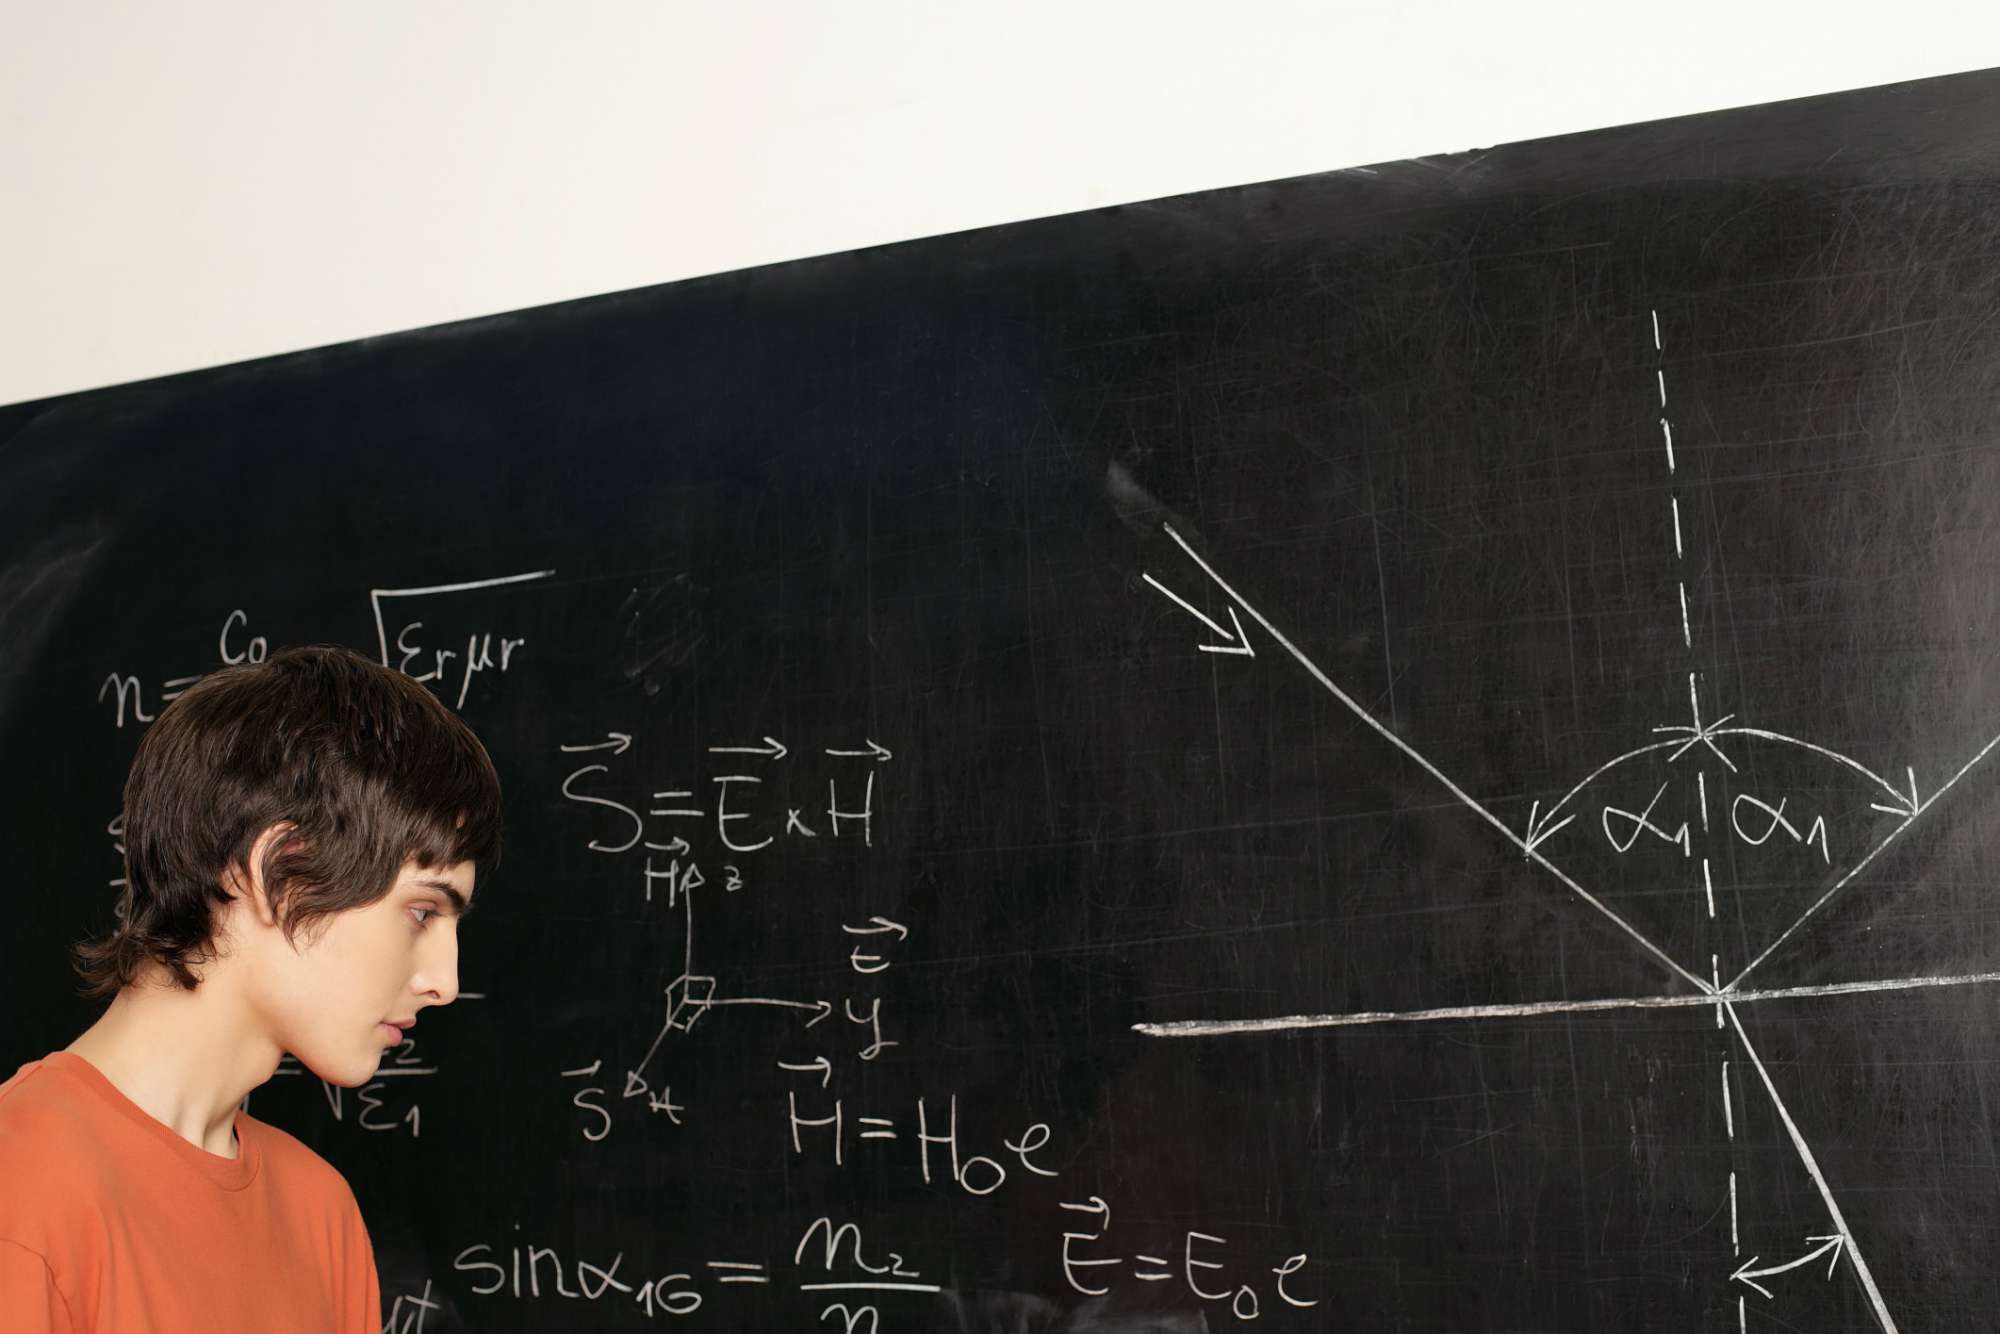 Student looking at equation on blackboard